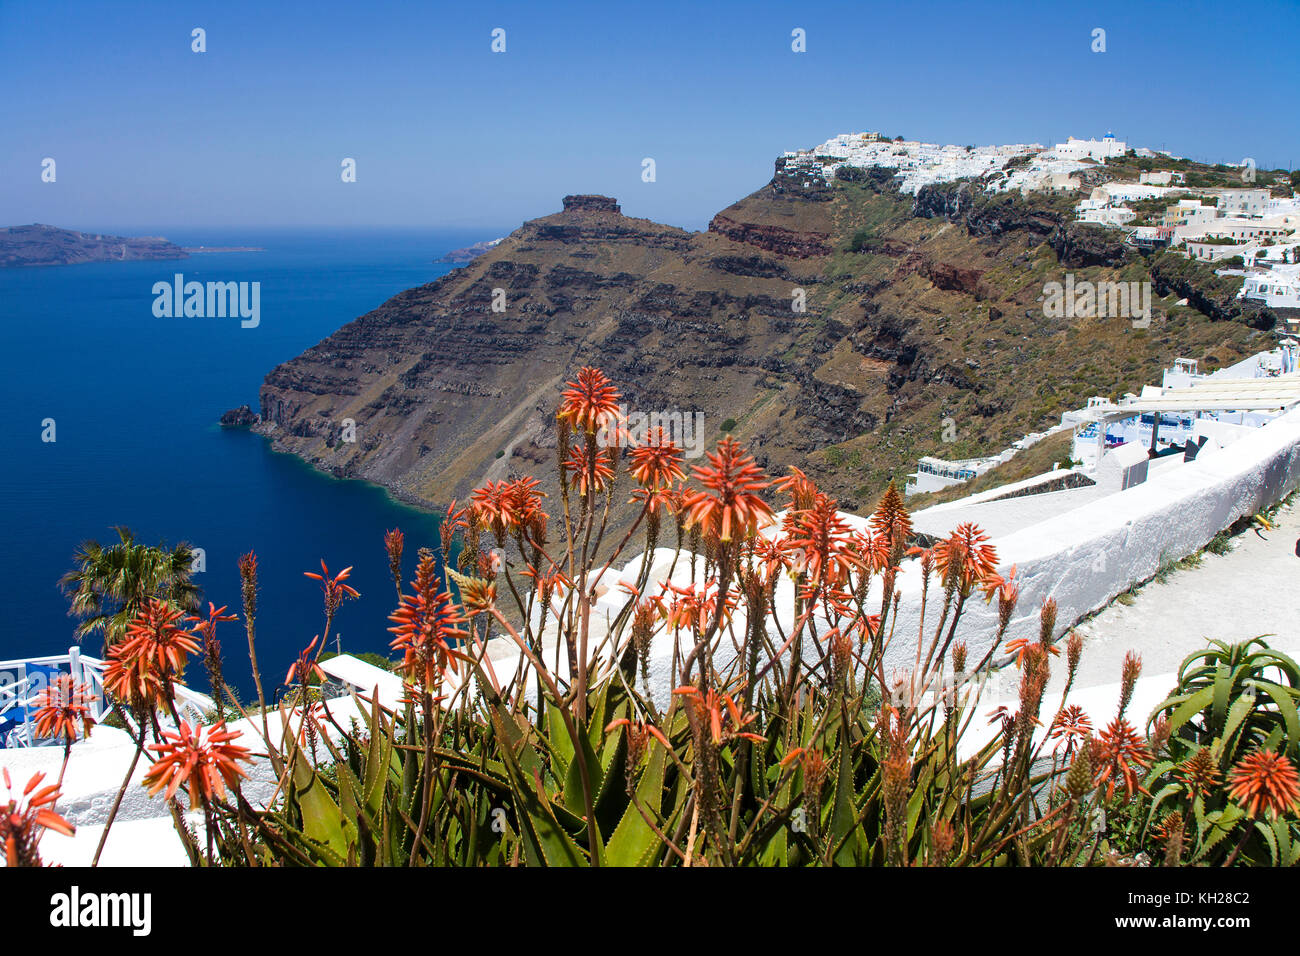 View from the crater edge path at Firofestani on Caldera and the village Imerovigli with Scaros rock, Santorini, Cyclades, Greece, Mediterranean S Stock Photo